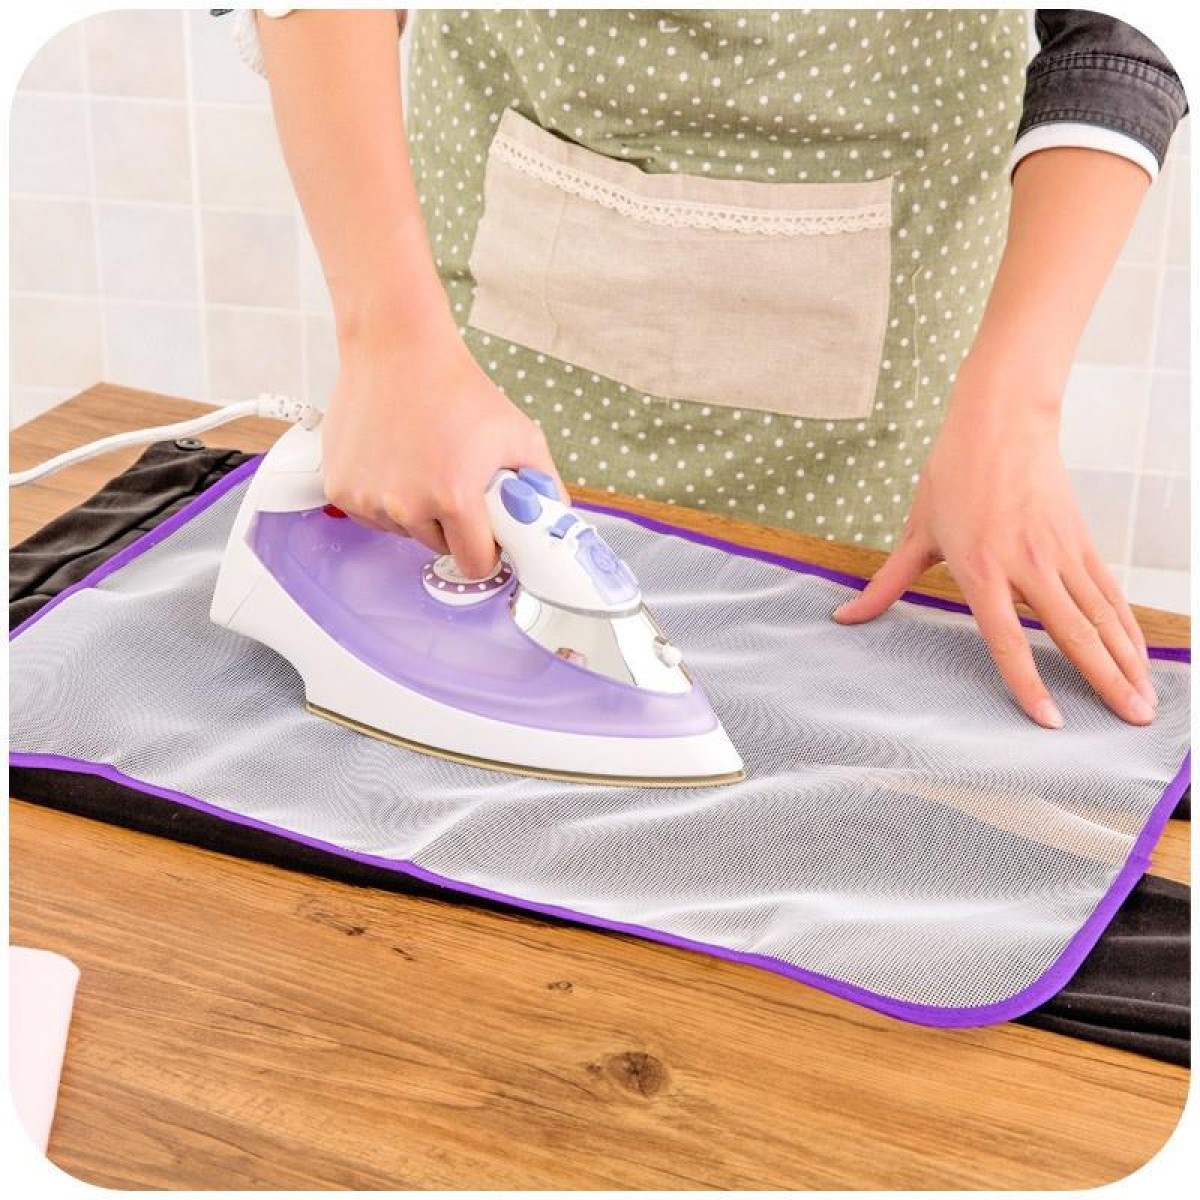 5 PCS Ironing Board Cover Protective Mesh Iron Protect Cover Cloth, Style:Large Size(Random Color Delivery)